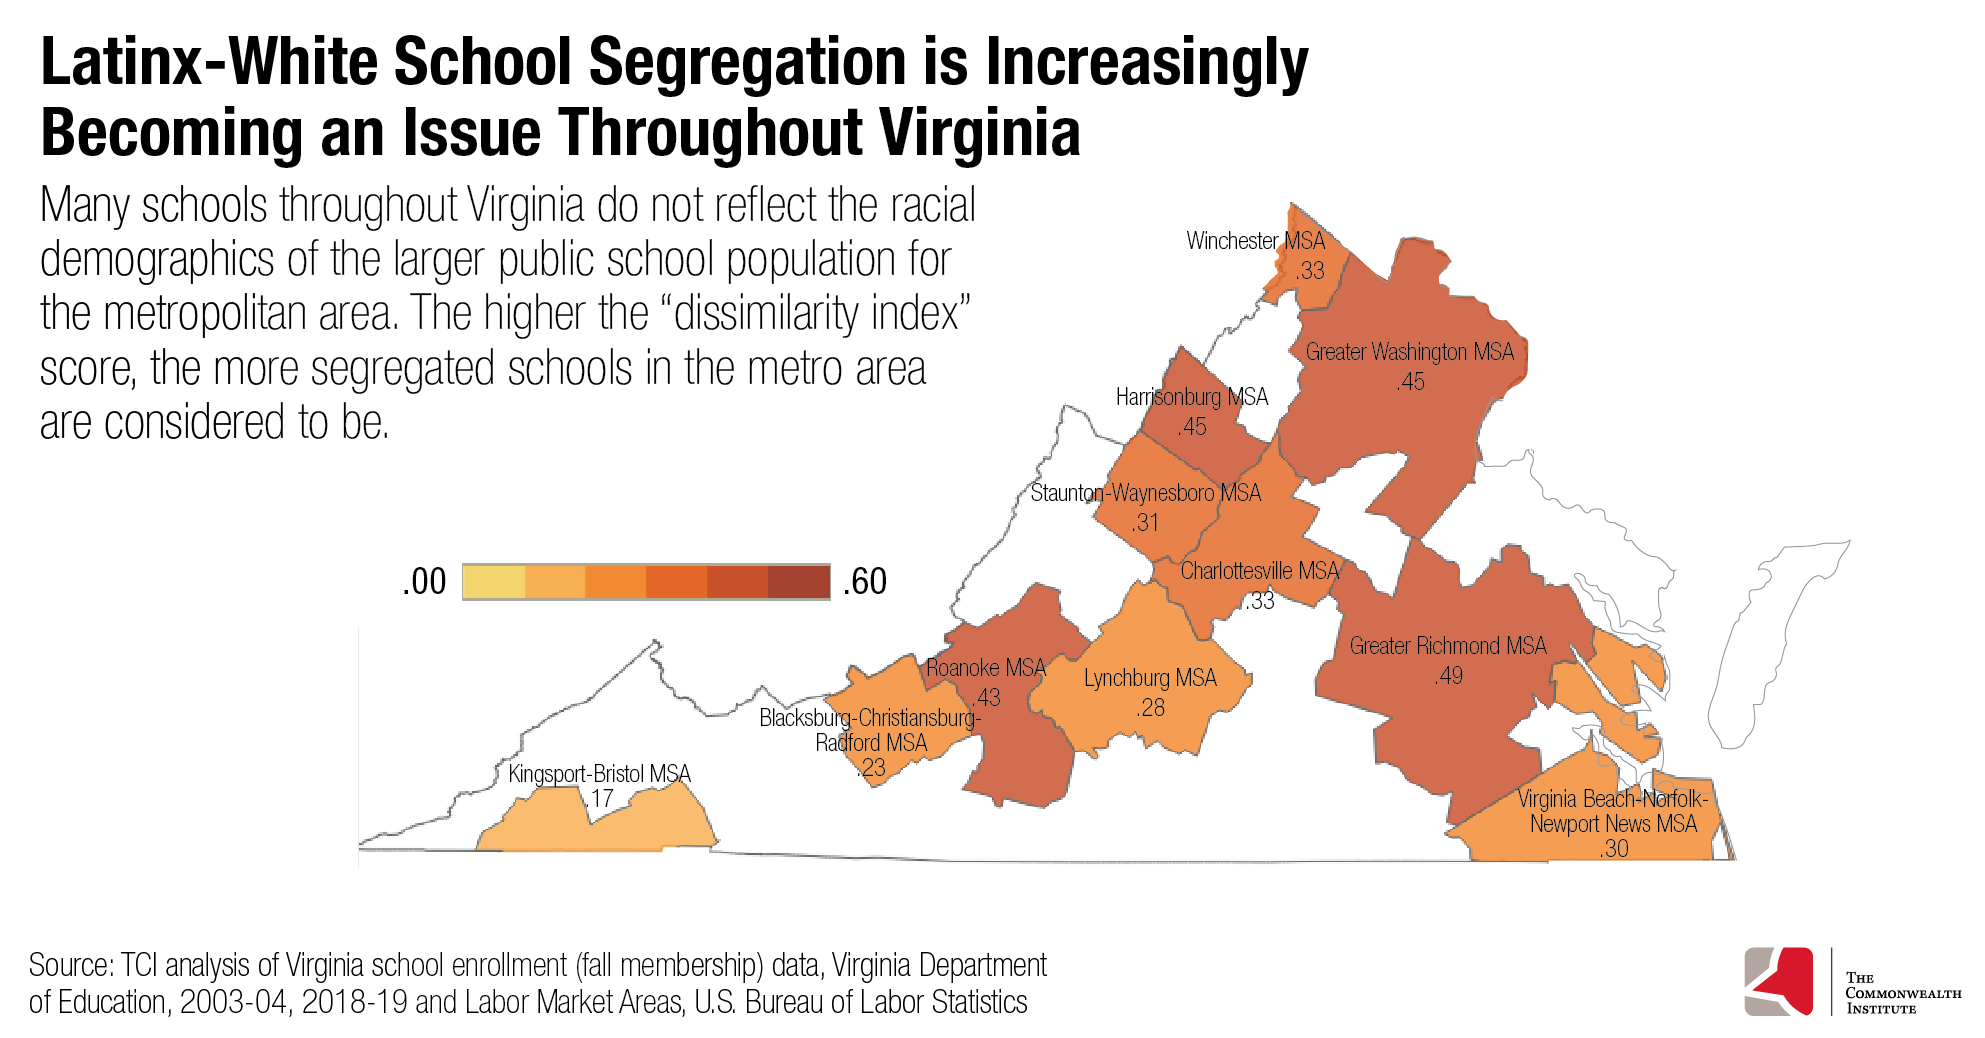 Map of Virginia showing the levels of Latinx-White school segregation in Virginia Metropolitan Statistical Areas. Many schools throughout Virginia do not reflect the racial demographics of the larger public school population for the metro area